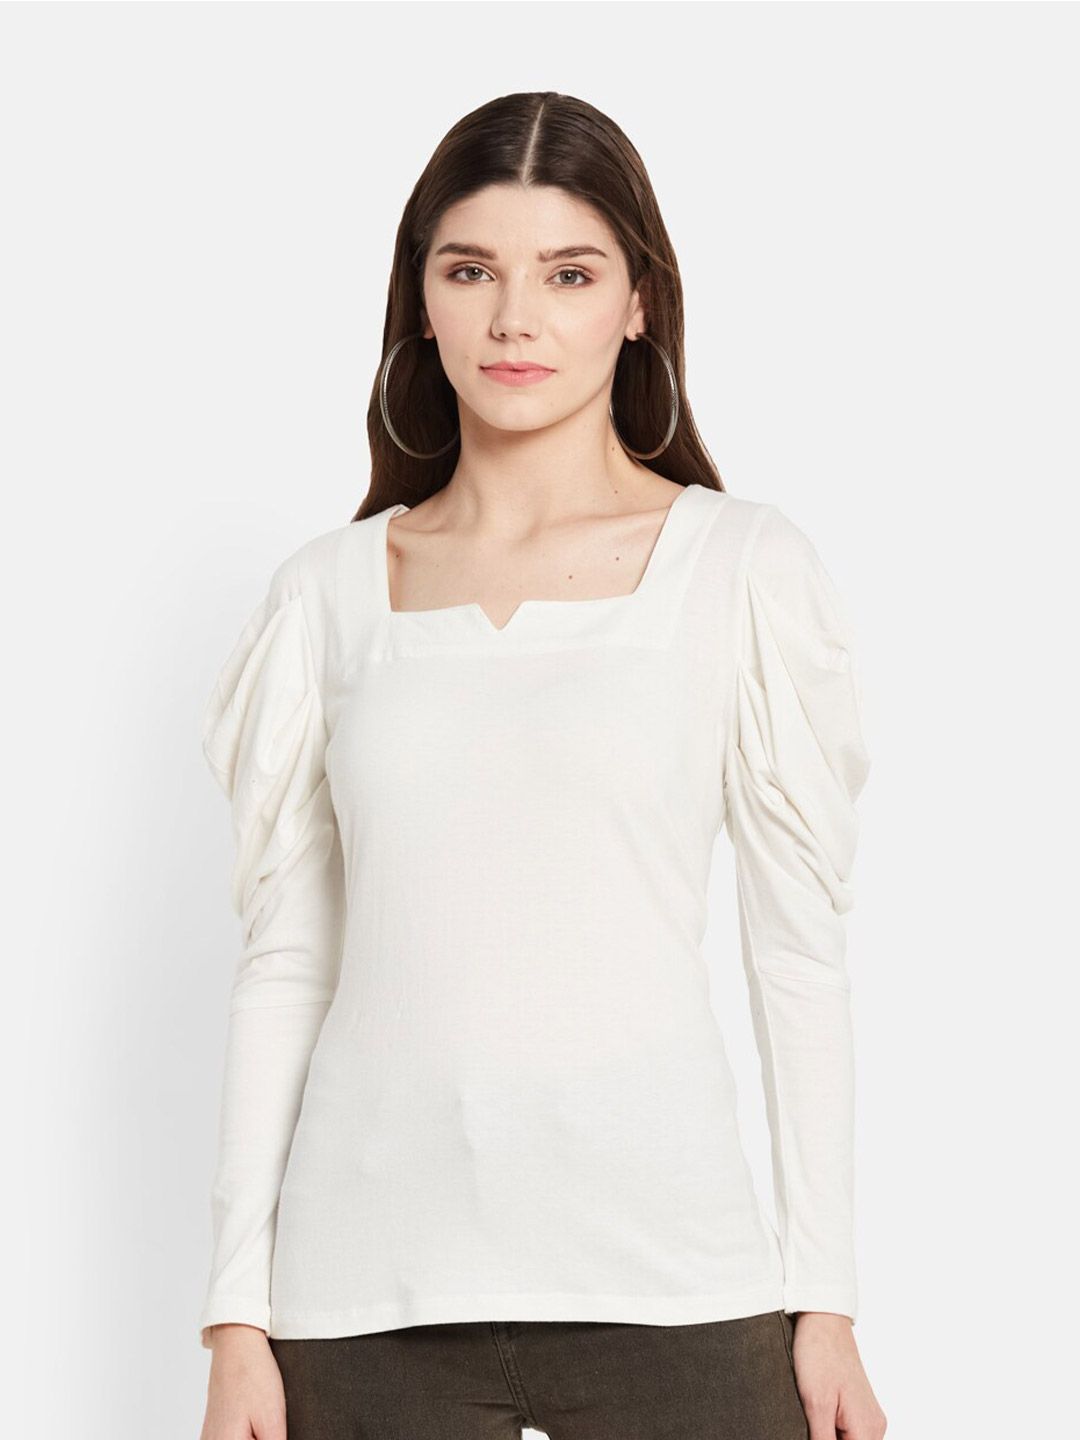 UNMADE Square Neck Puffed Sleeve Top Price in India